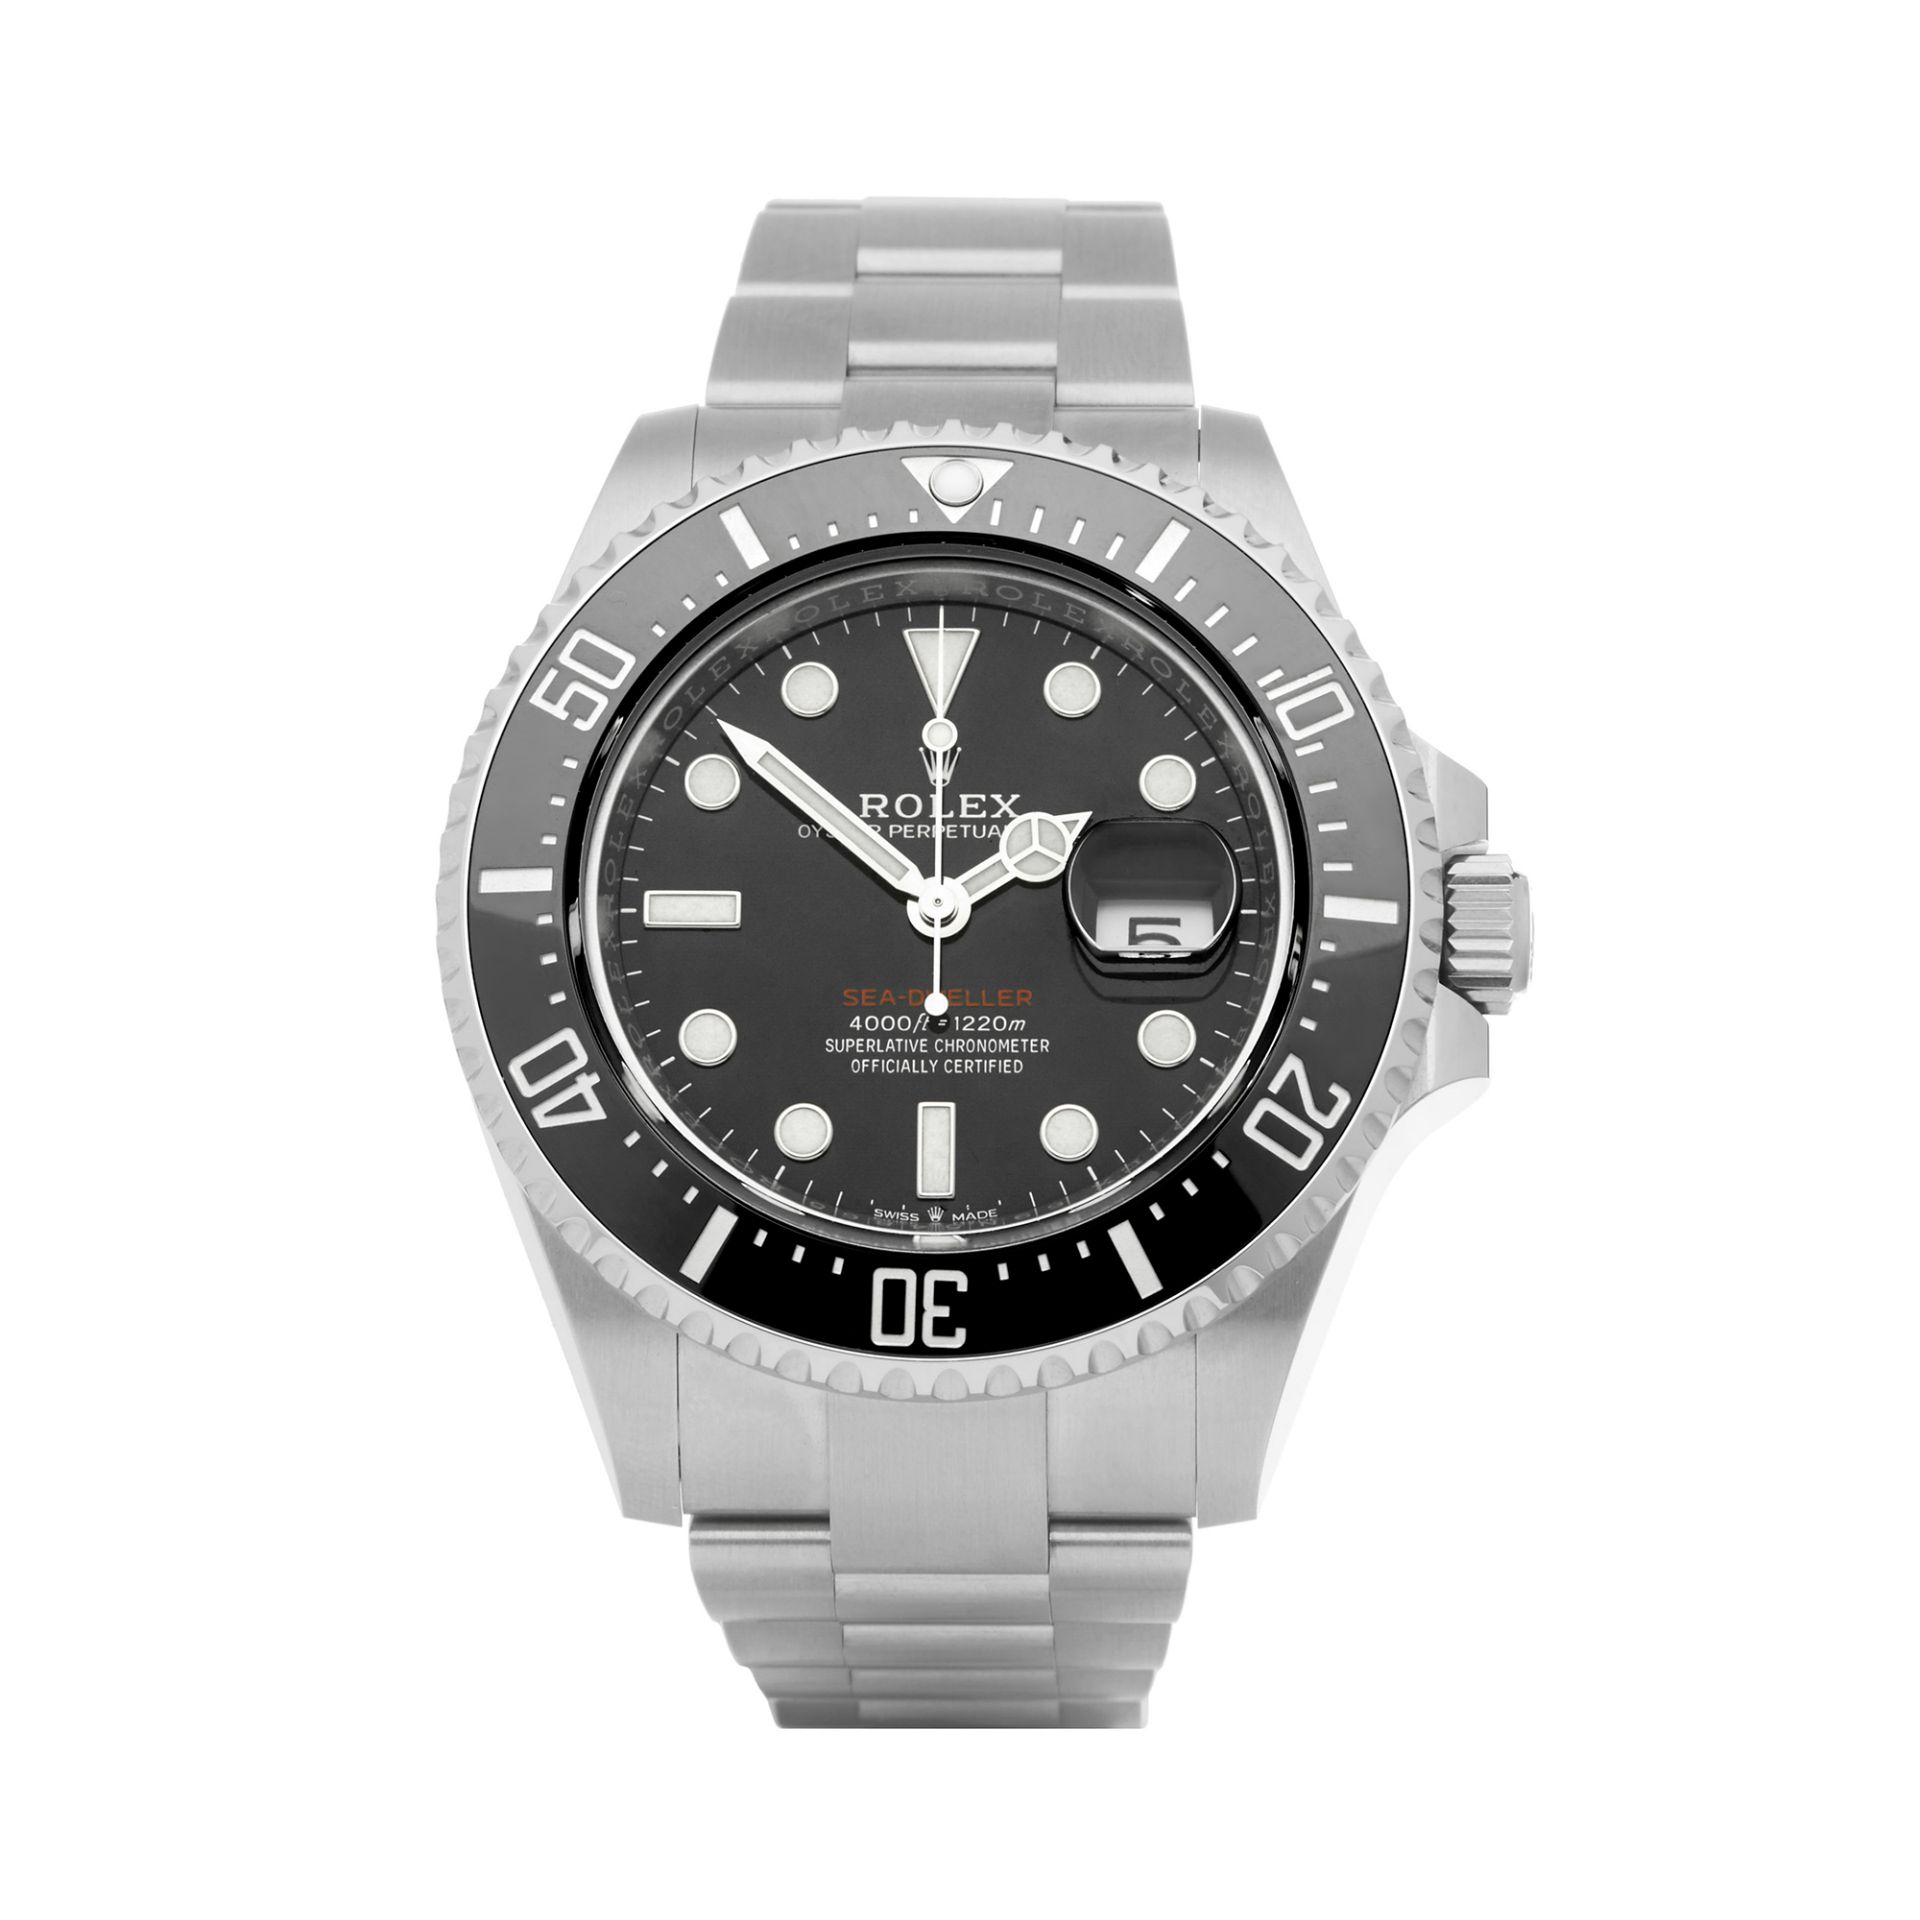 2018 Sea-Dweller 50th Anniversary Red Writing Stainless Steel - 126600 - Image 8 of 8